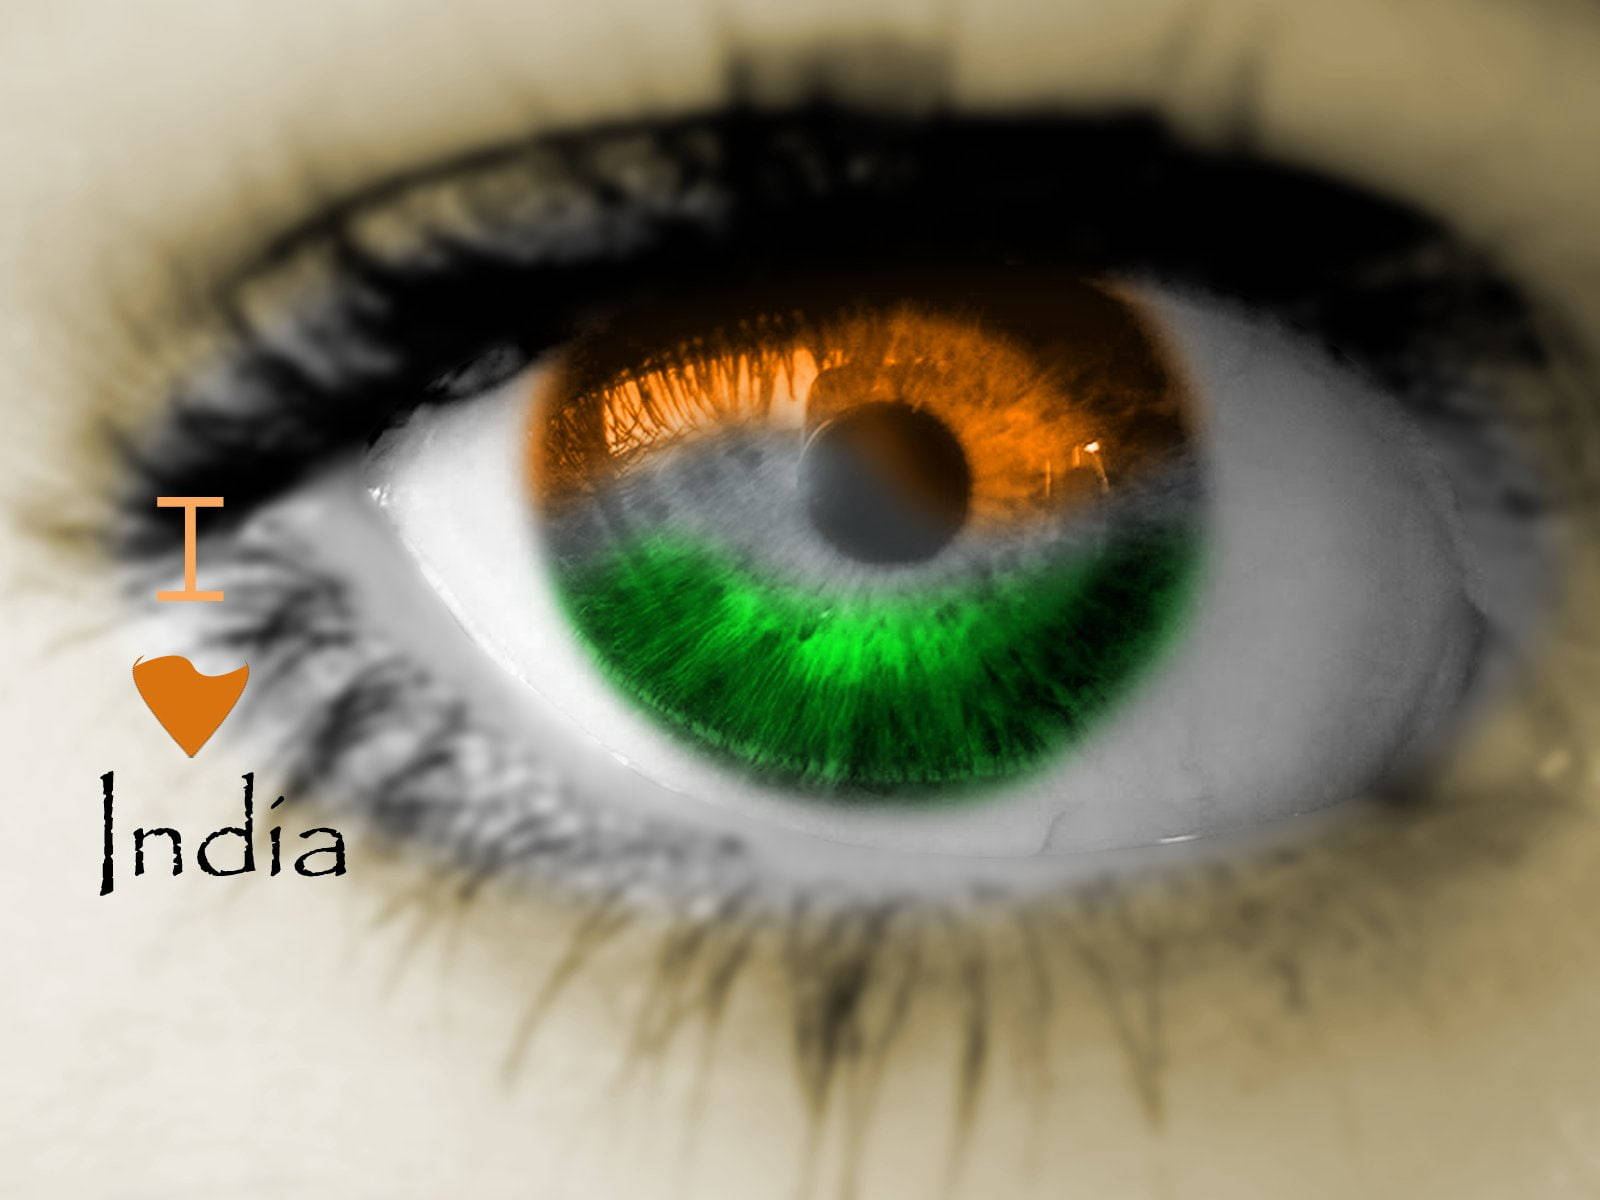 Indian Pride: A Stunning Reflection Of The Indian Flag On A Human Eye. Background